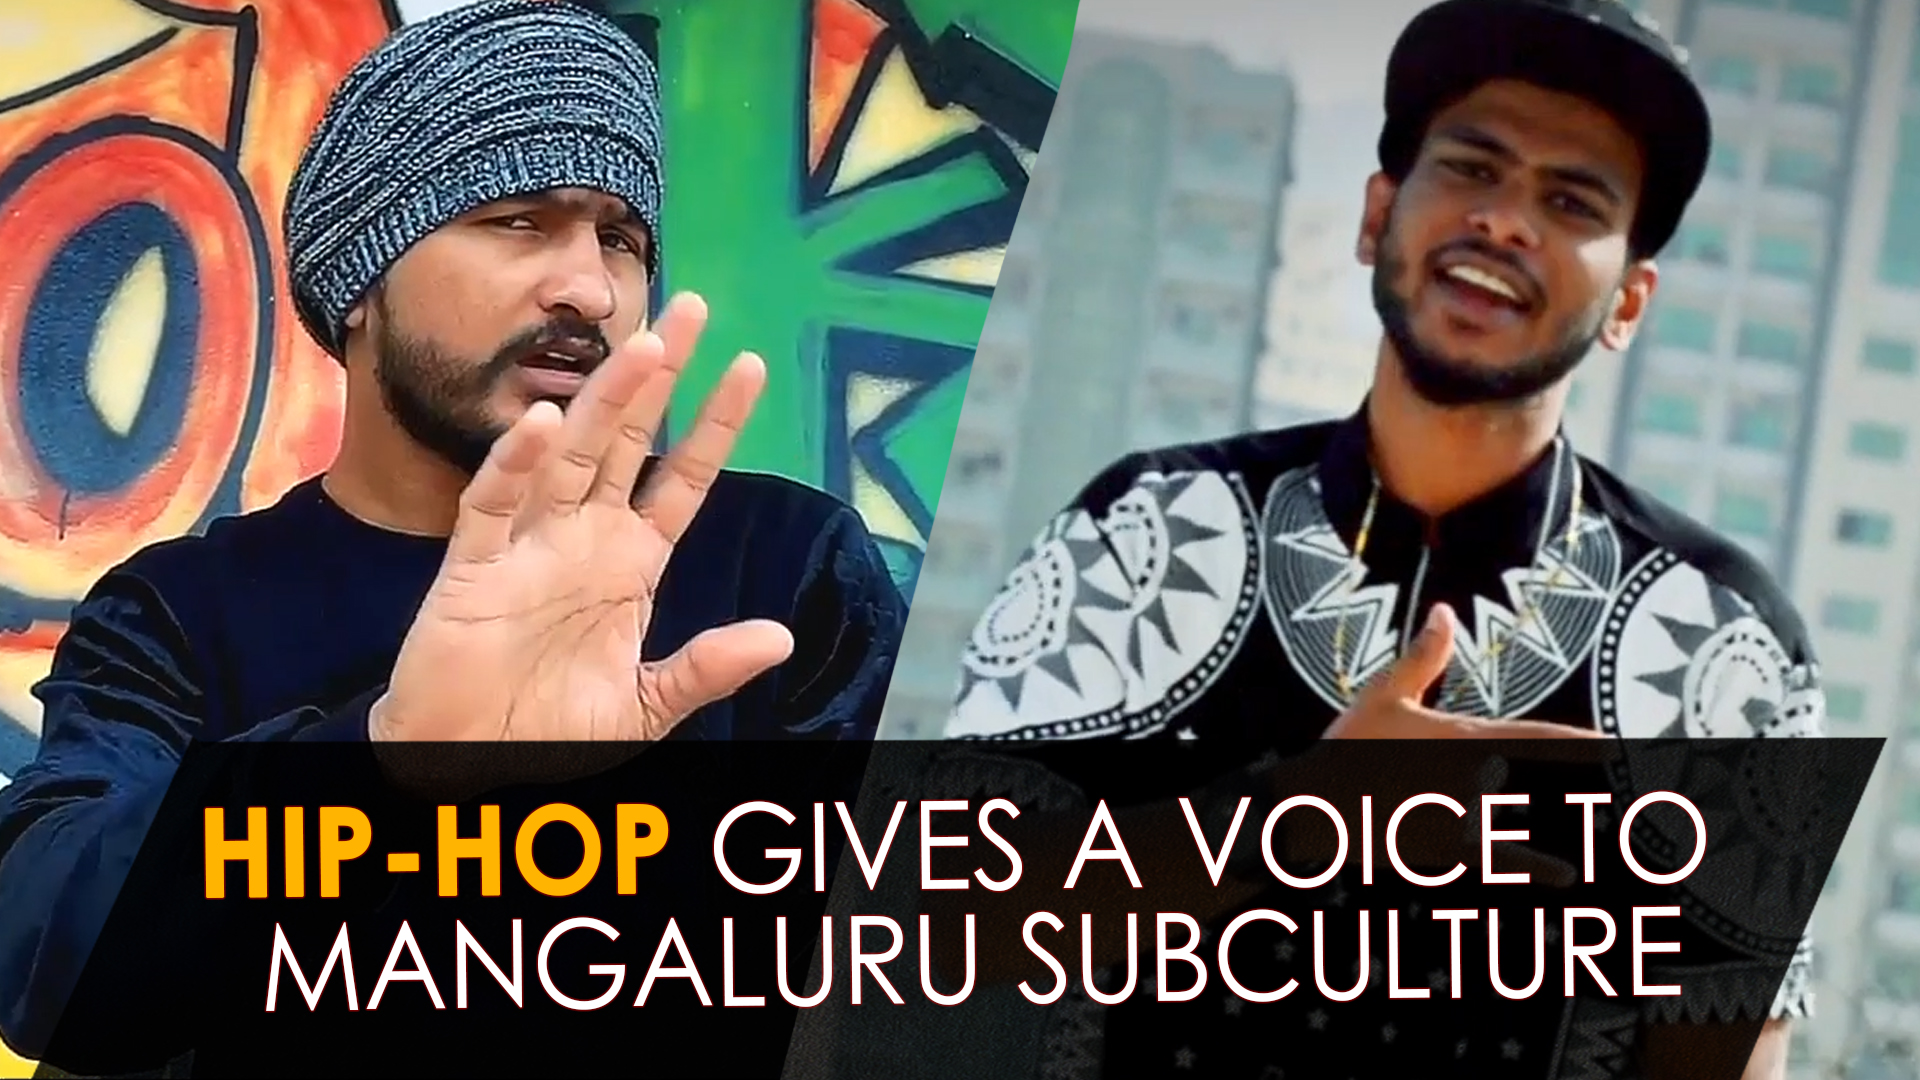 Tuning in to Mangaluru subculture with hip-hop